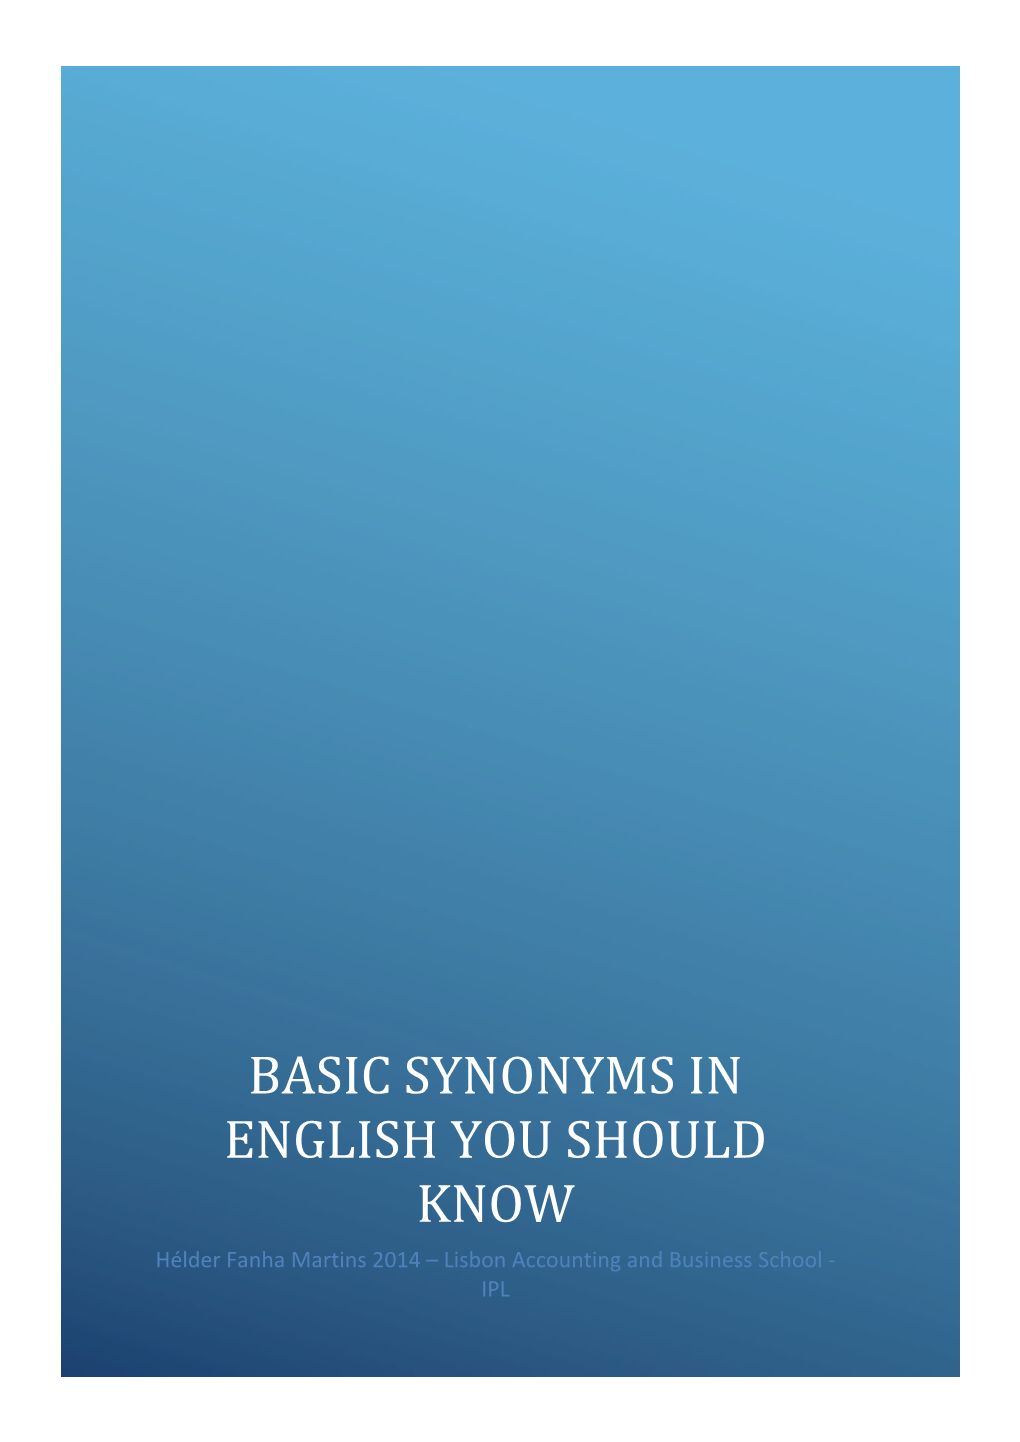 BASIC SYNONYMS in ENGLISH YOU SHOULD KNOW Hélder Fanha Martins 2014 – Lisbon Accounting and Business School ‐ IPL Basic Synonyms in English You Should Know